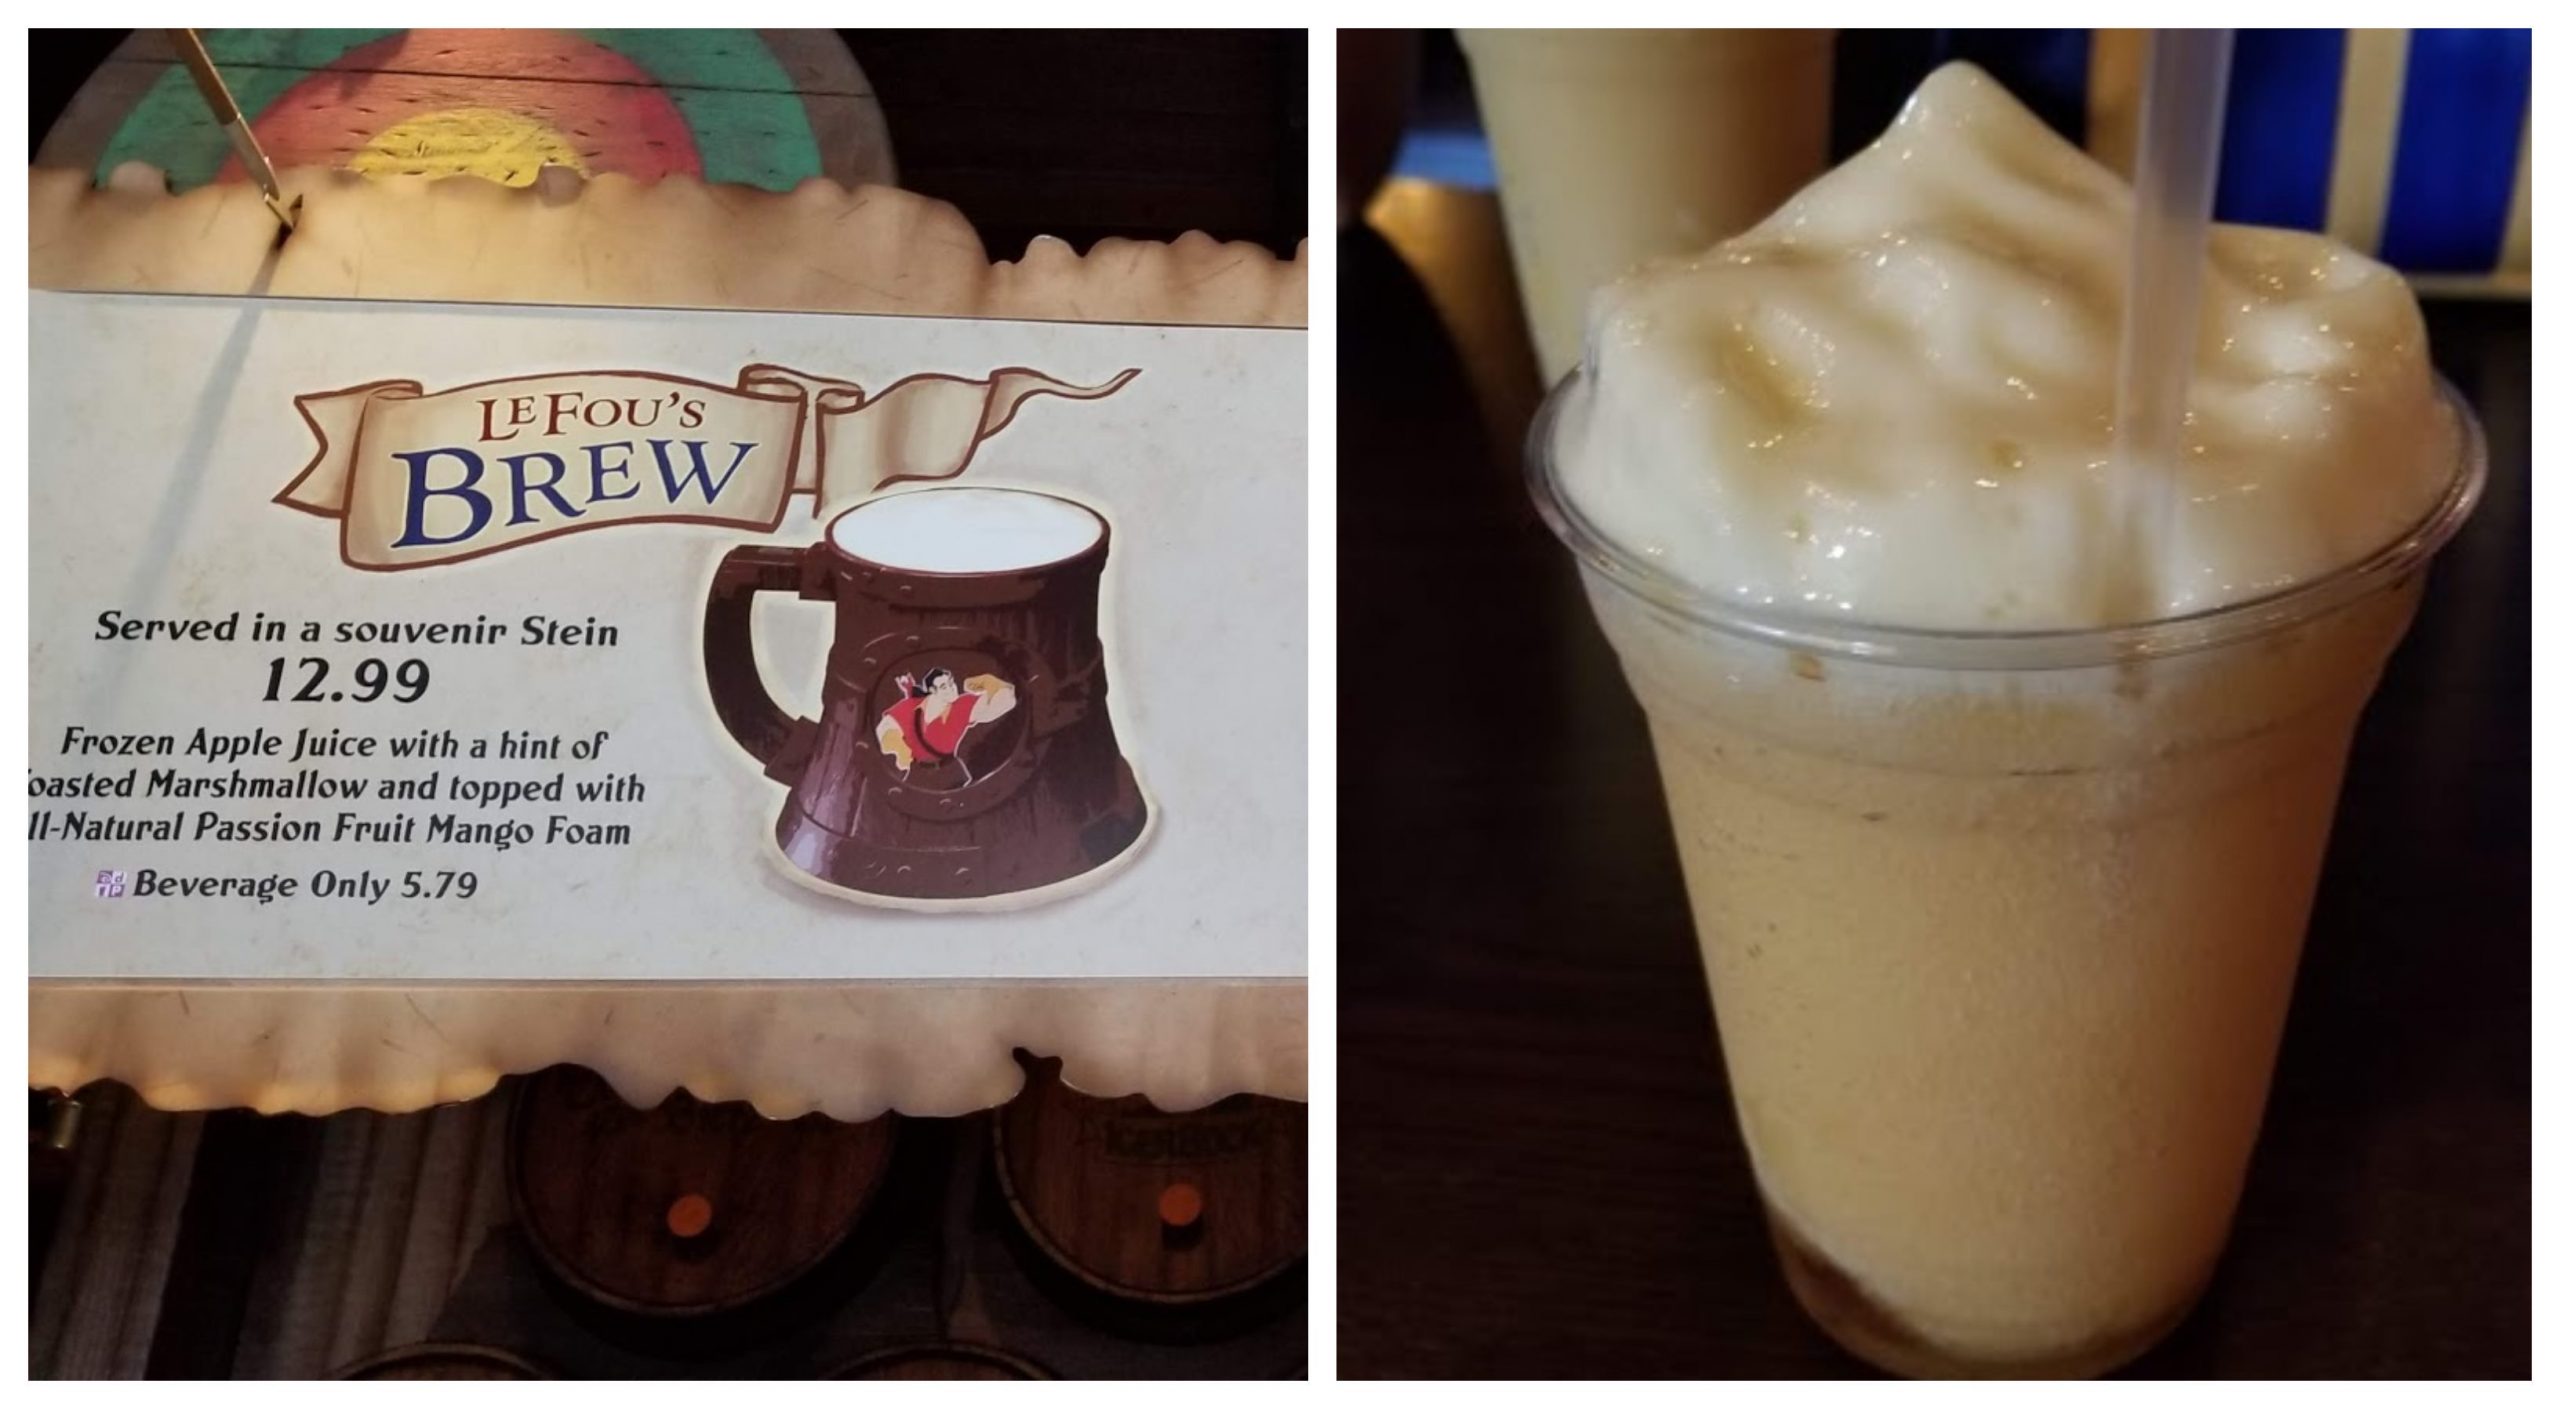 Make this at home – LeFou’s Brew from the Magic Kingdom